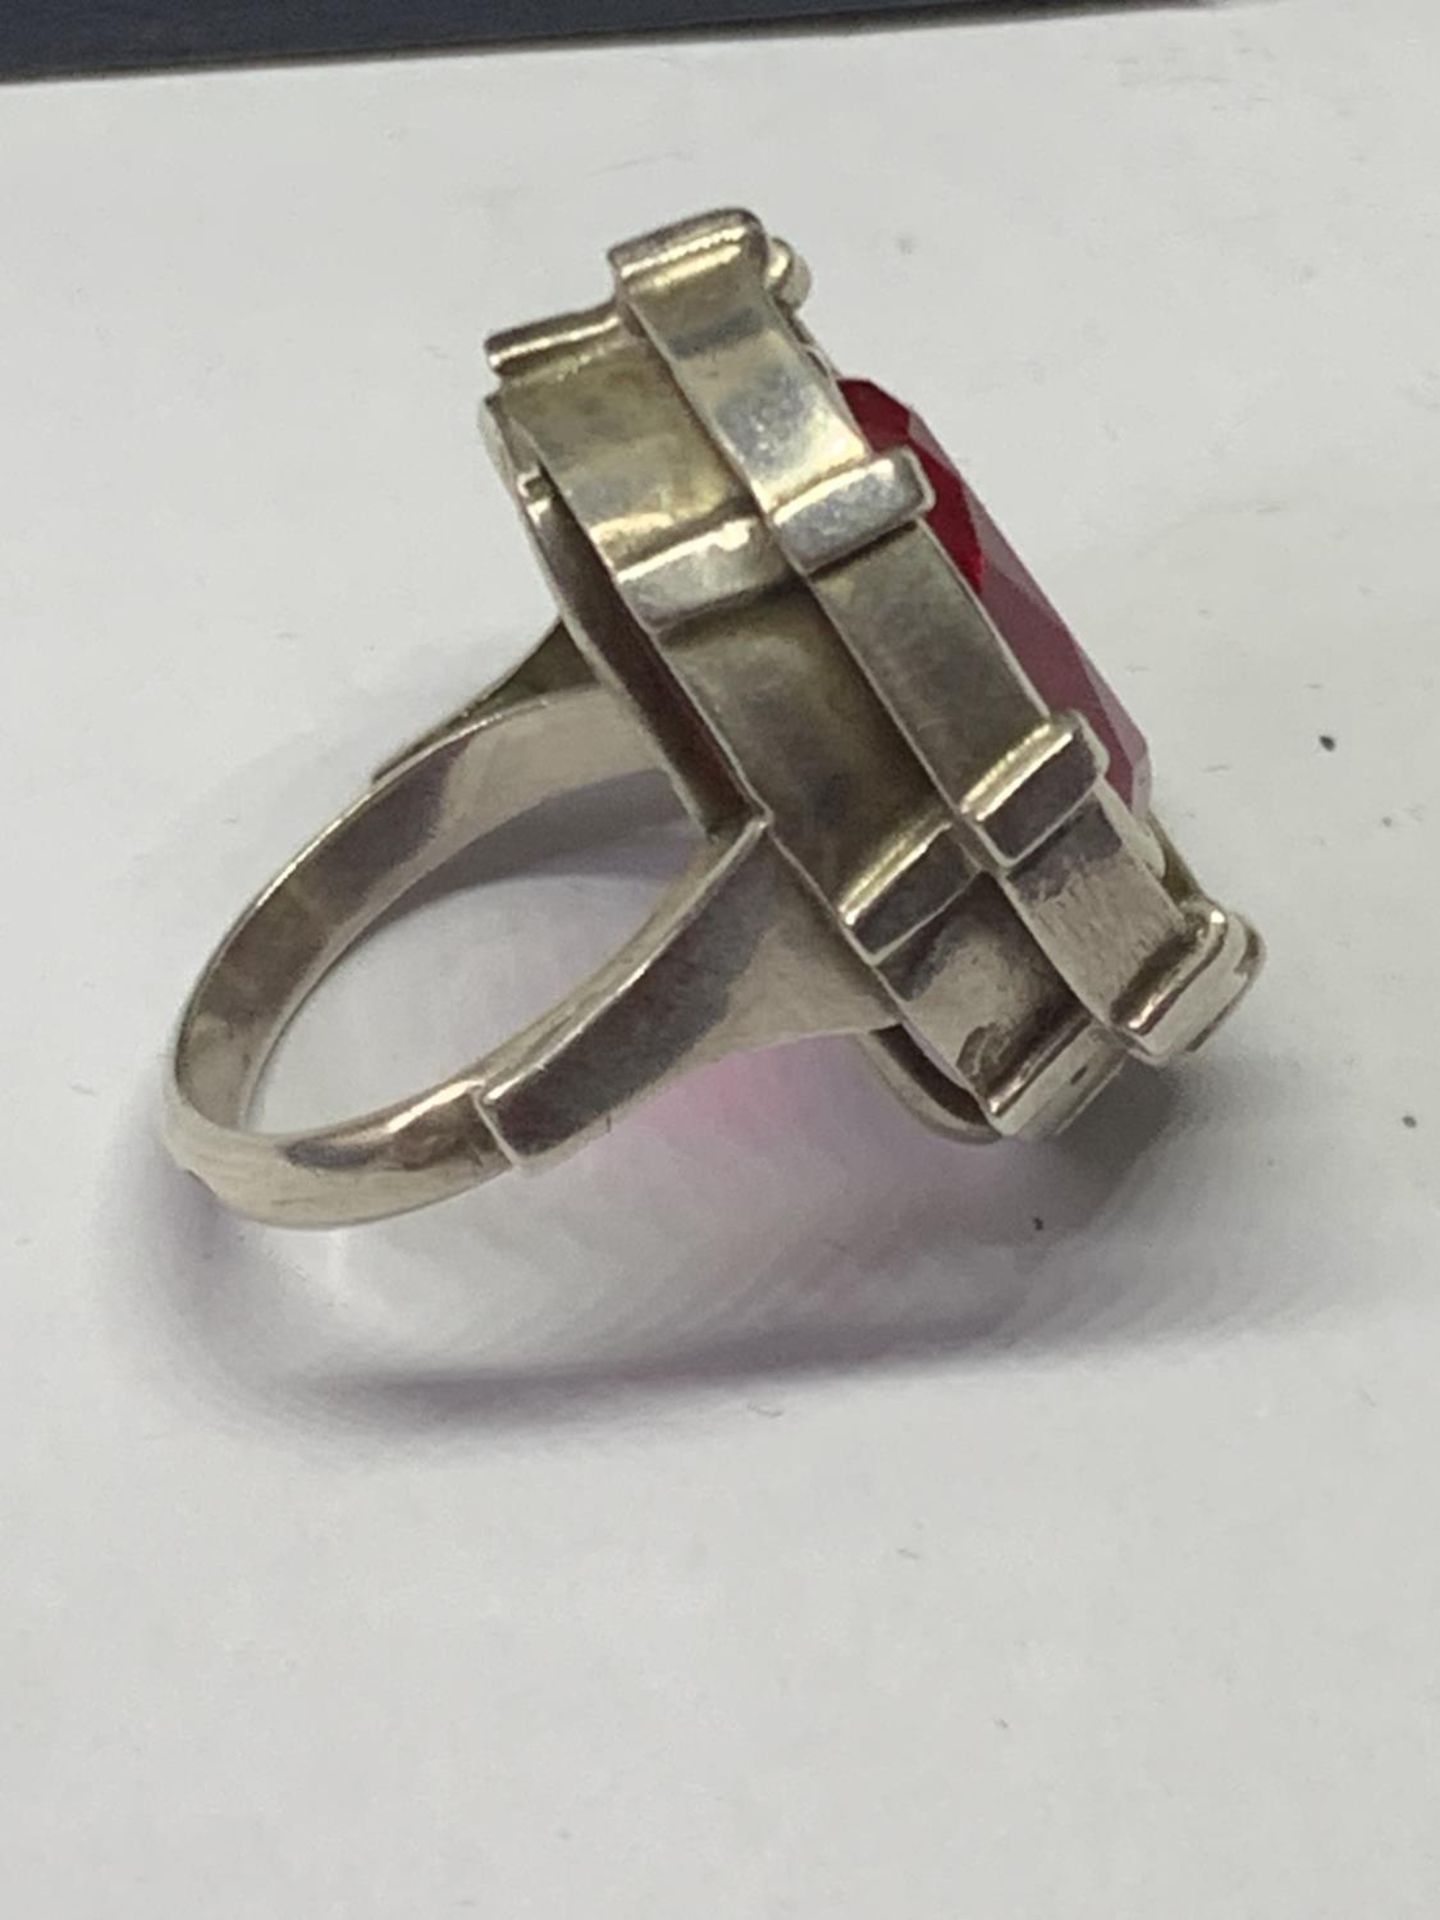 AN OVAL DESIGNER RING WITH RED STONE IN A PRESENTATION BOX - Image 3 of 3